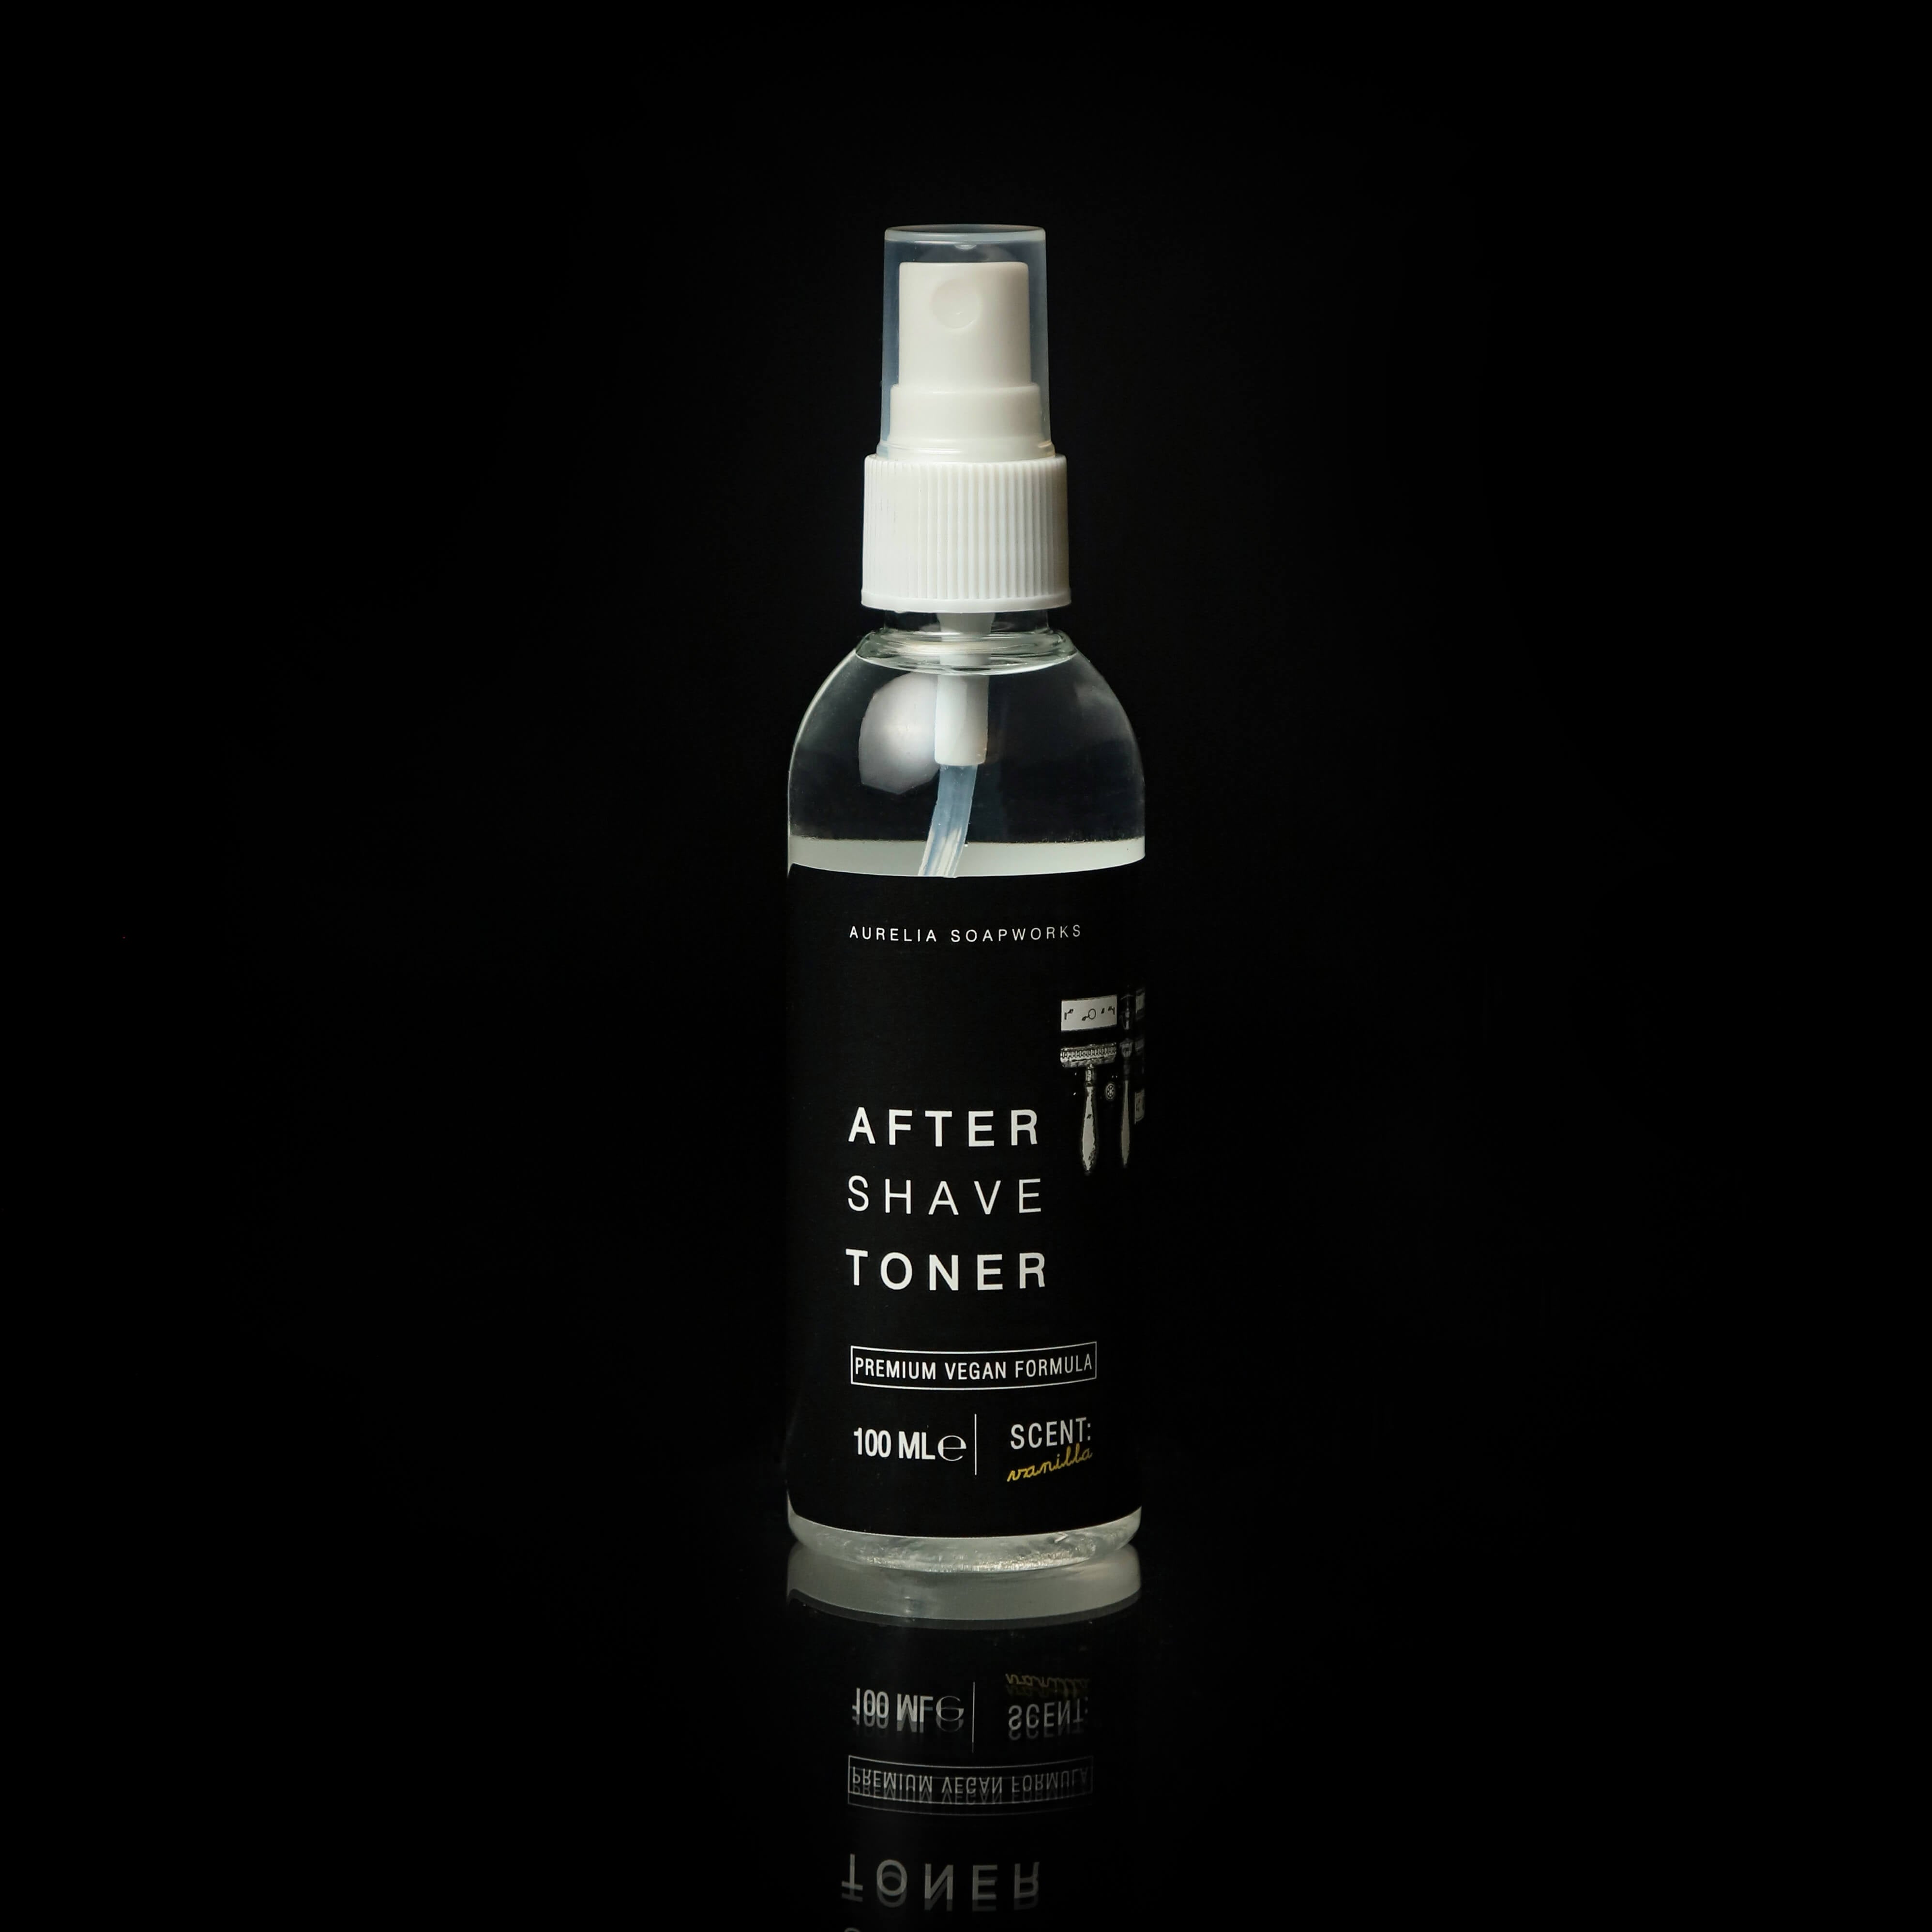 Alcohol free aftershave toner